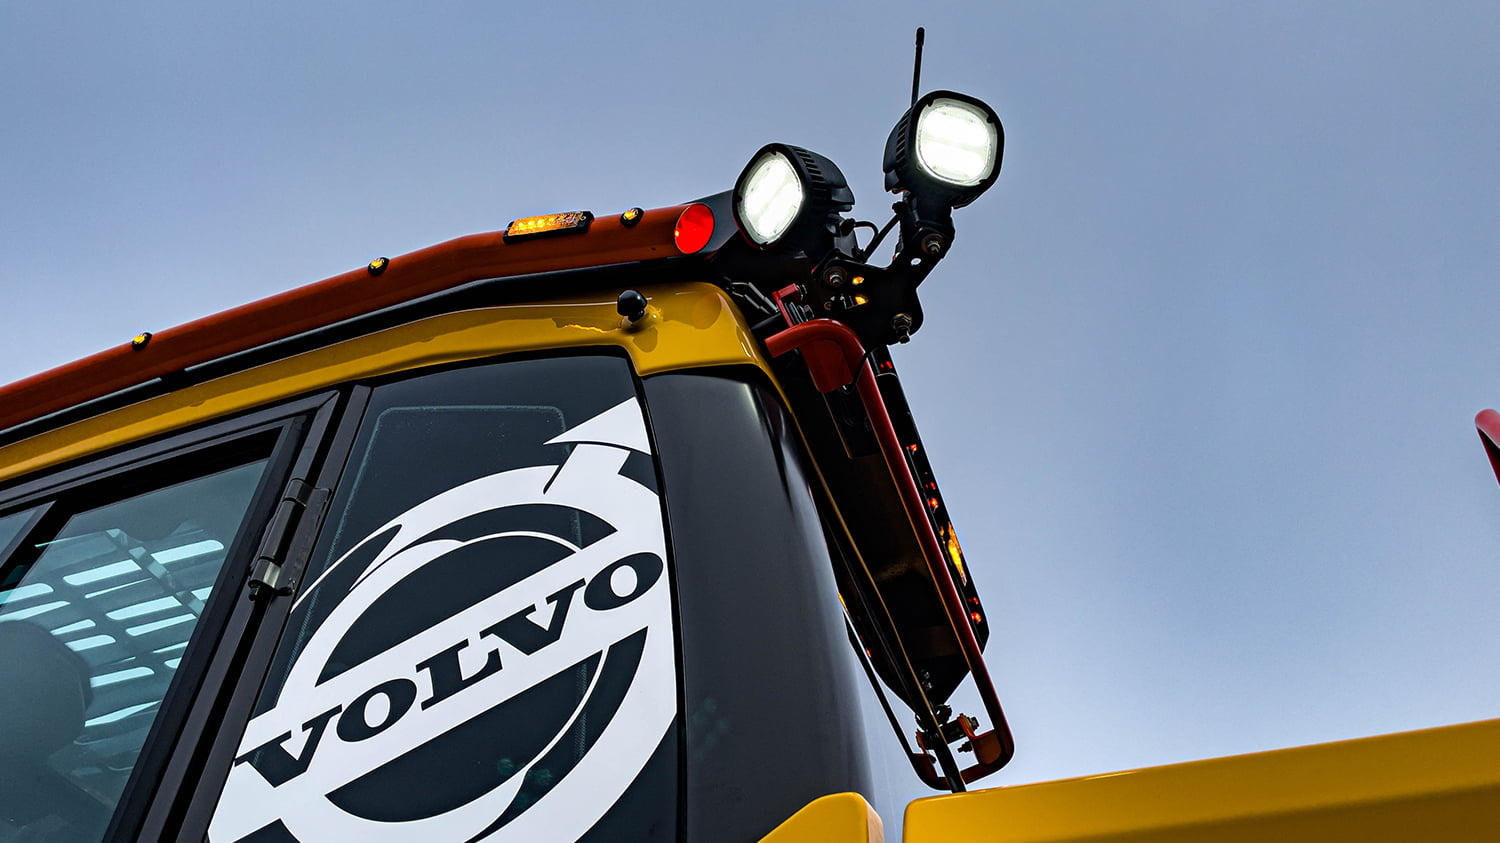 Swecon volvo upgrade to LED head lights and work lights construction machine